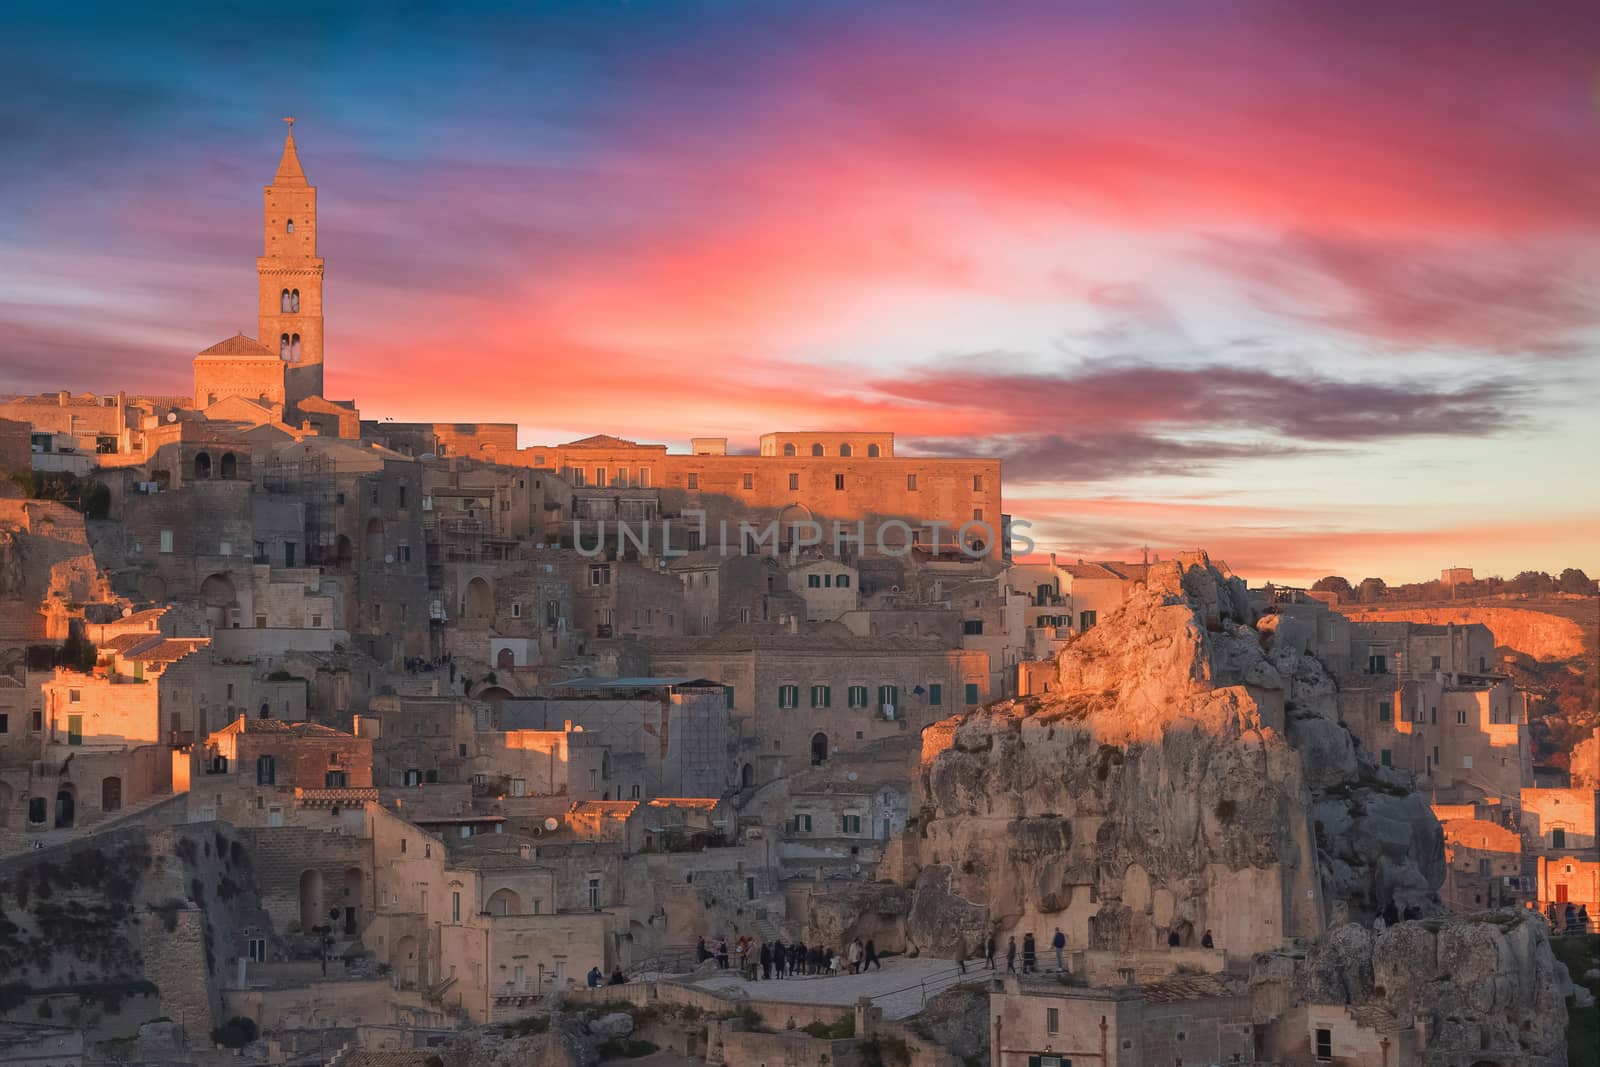 panoramic view of typical stones and church of Matera and the Madonna de Idris under sunset sky by donfiore